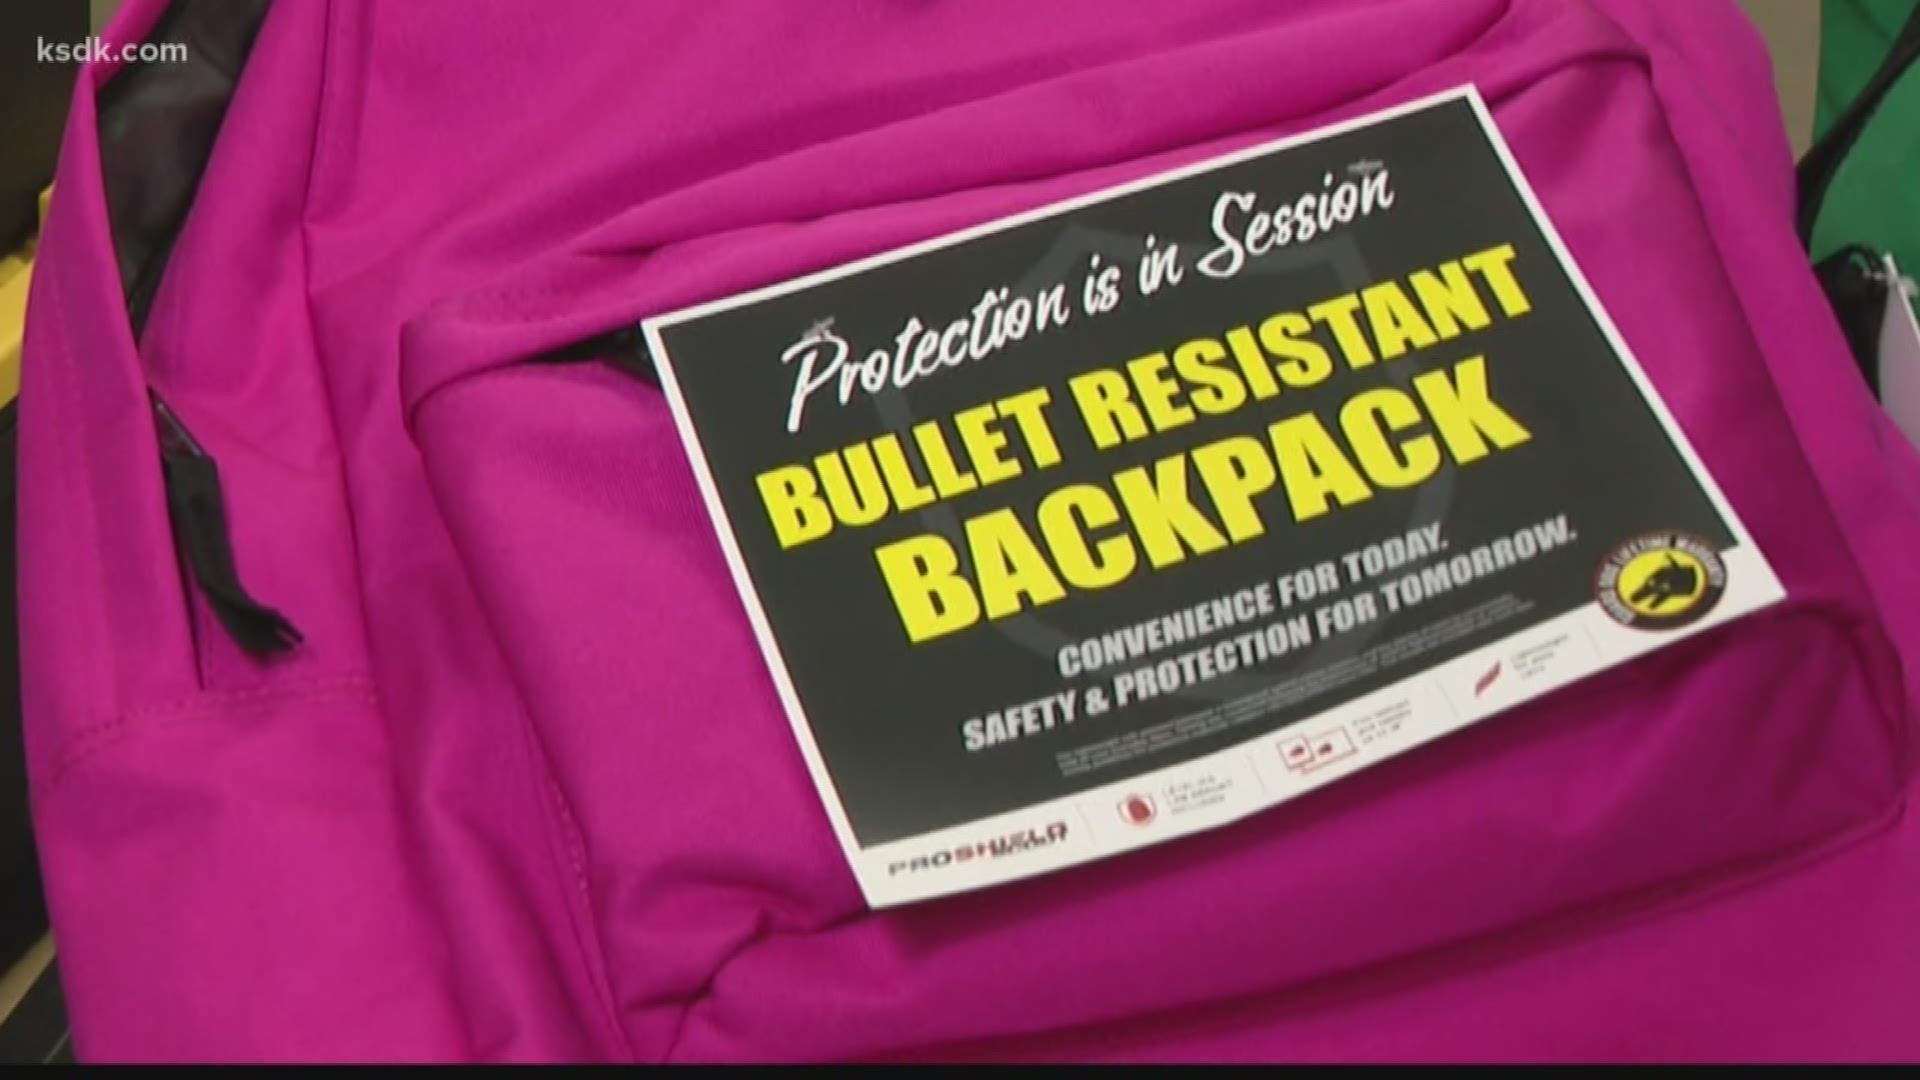 The bullet-resistant backpacks are available at both tactical stores and office supply stores.